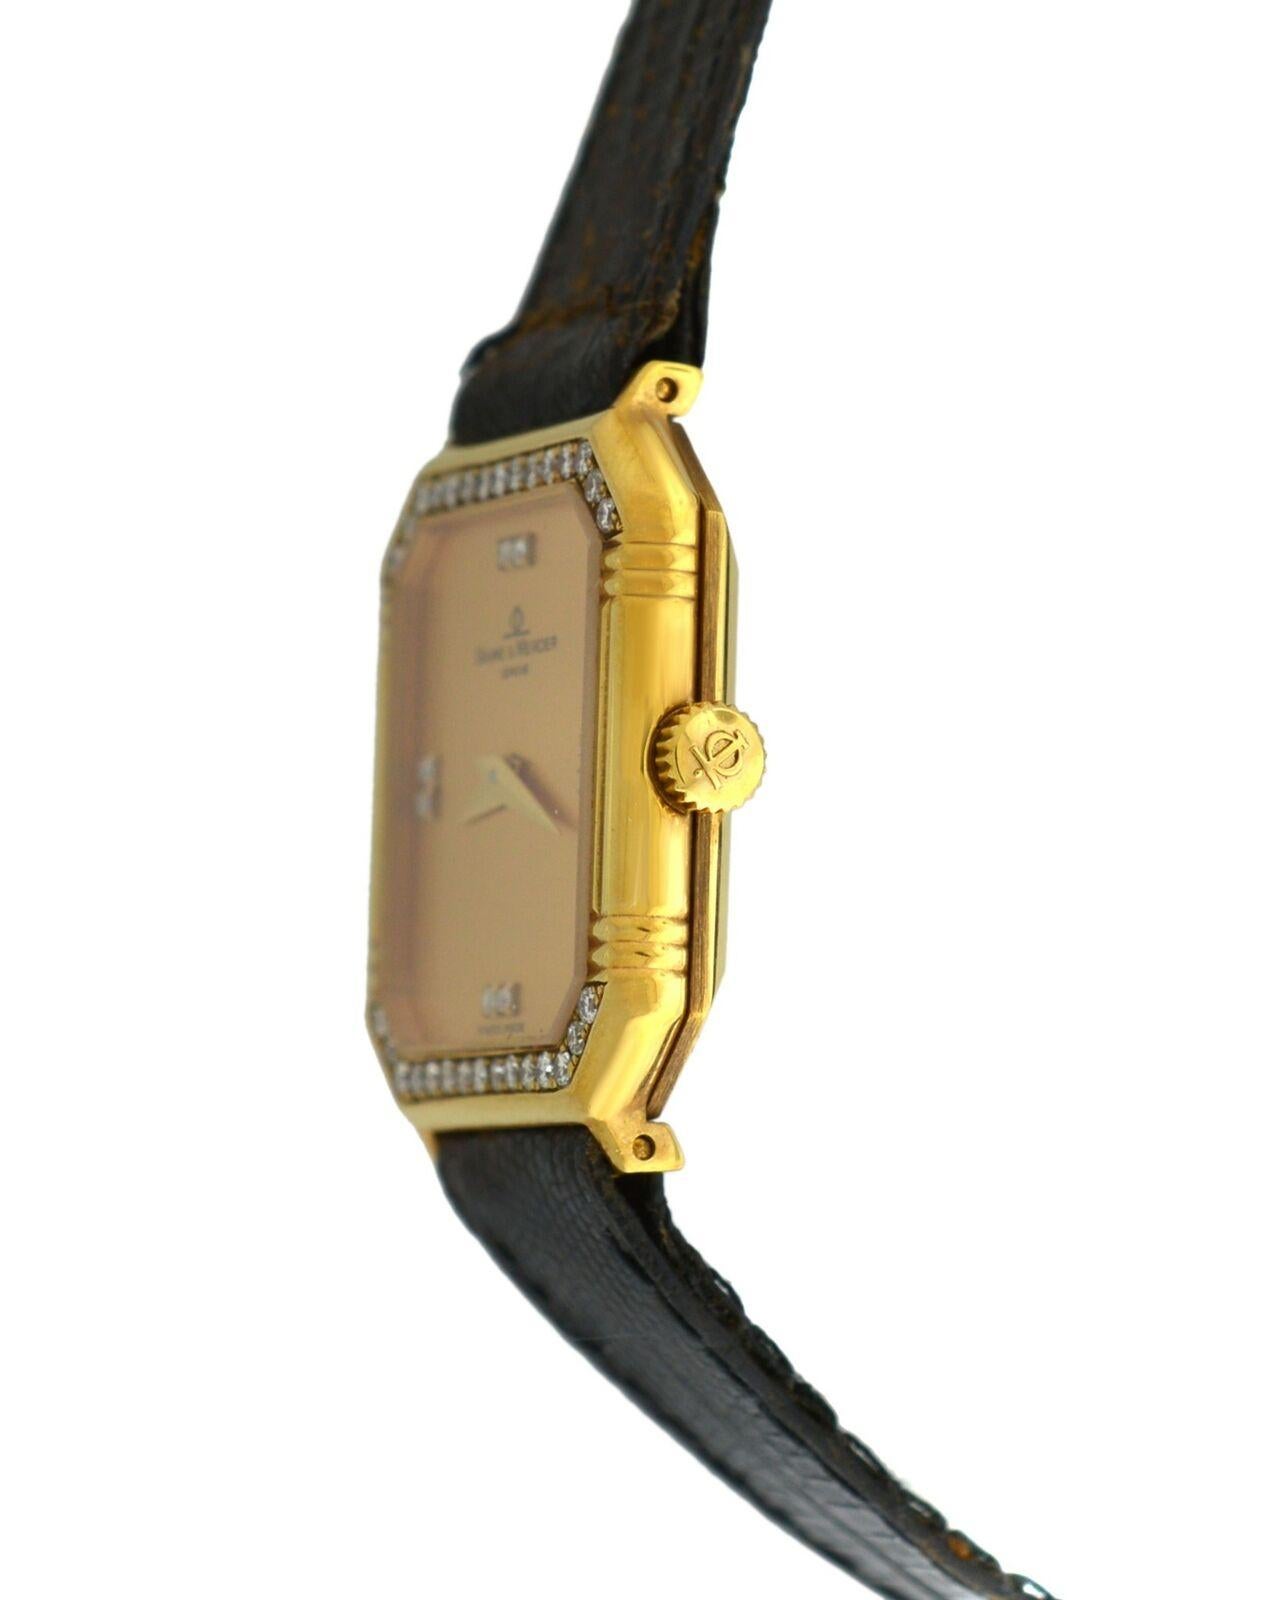 
Brand	Baume & Mercier
Model	18496
Gender	Ladies
Condition	New Store display
Movement	Swiss Quartz
Case Material	18K Yellow Gold
Bracelet / Strap Material	
Leather

Clasp / Buckle Material	
Gold plaque	
Clasp Type	Tang
Bracelet / Strap width	12 mm